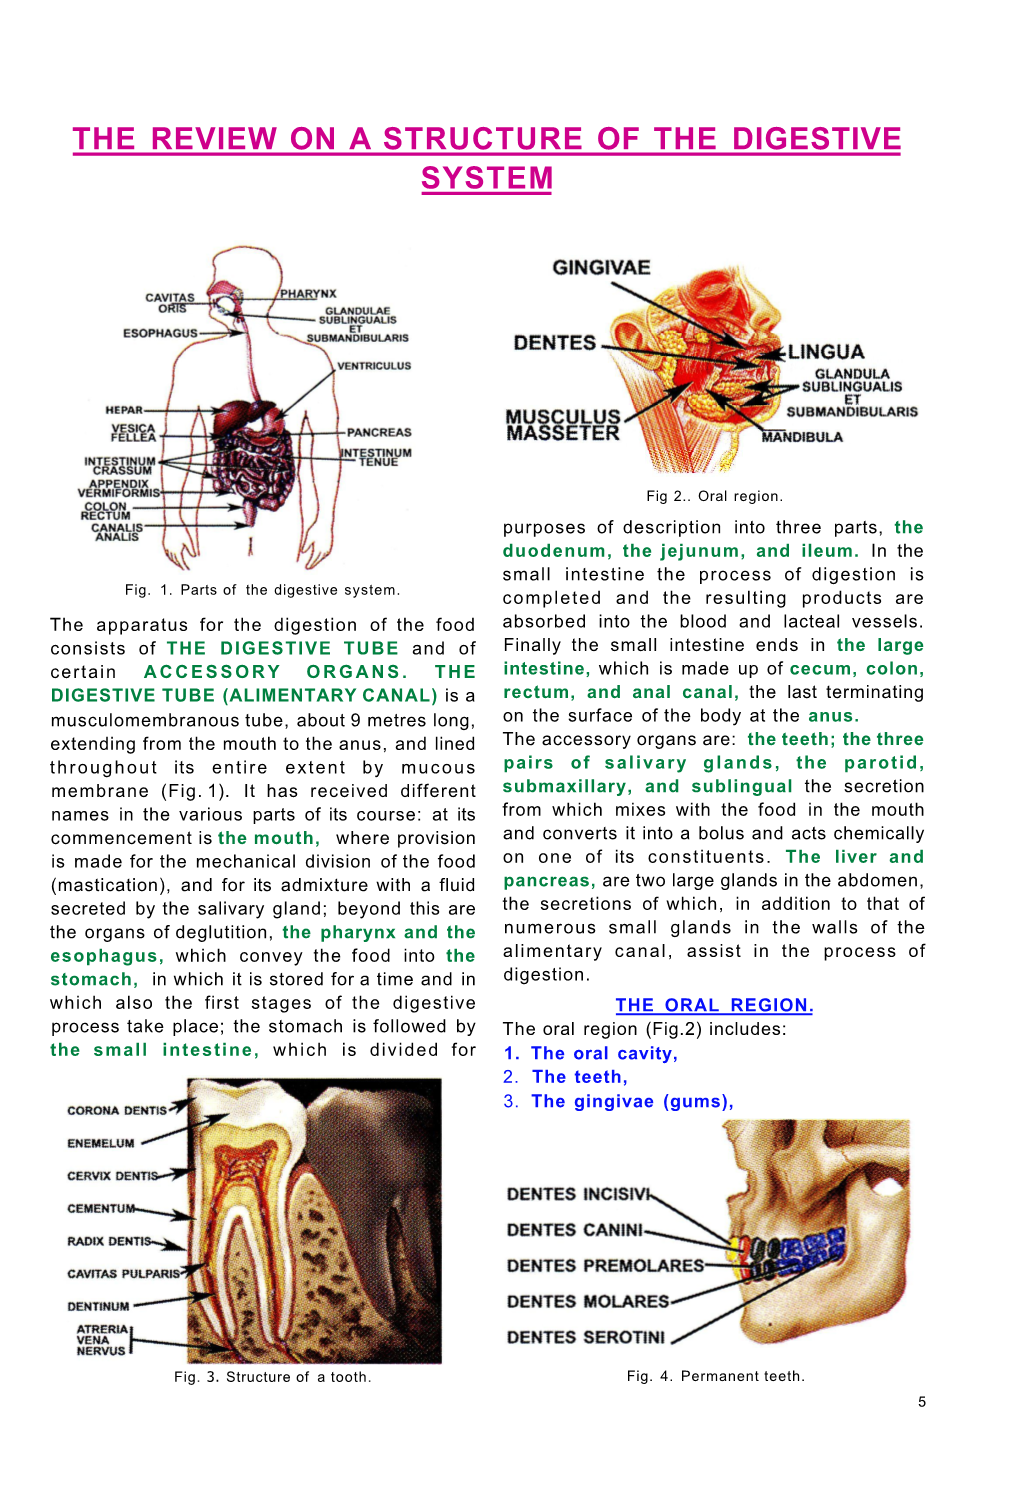 The Review on a Structure of the Digestive System